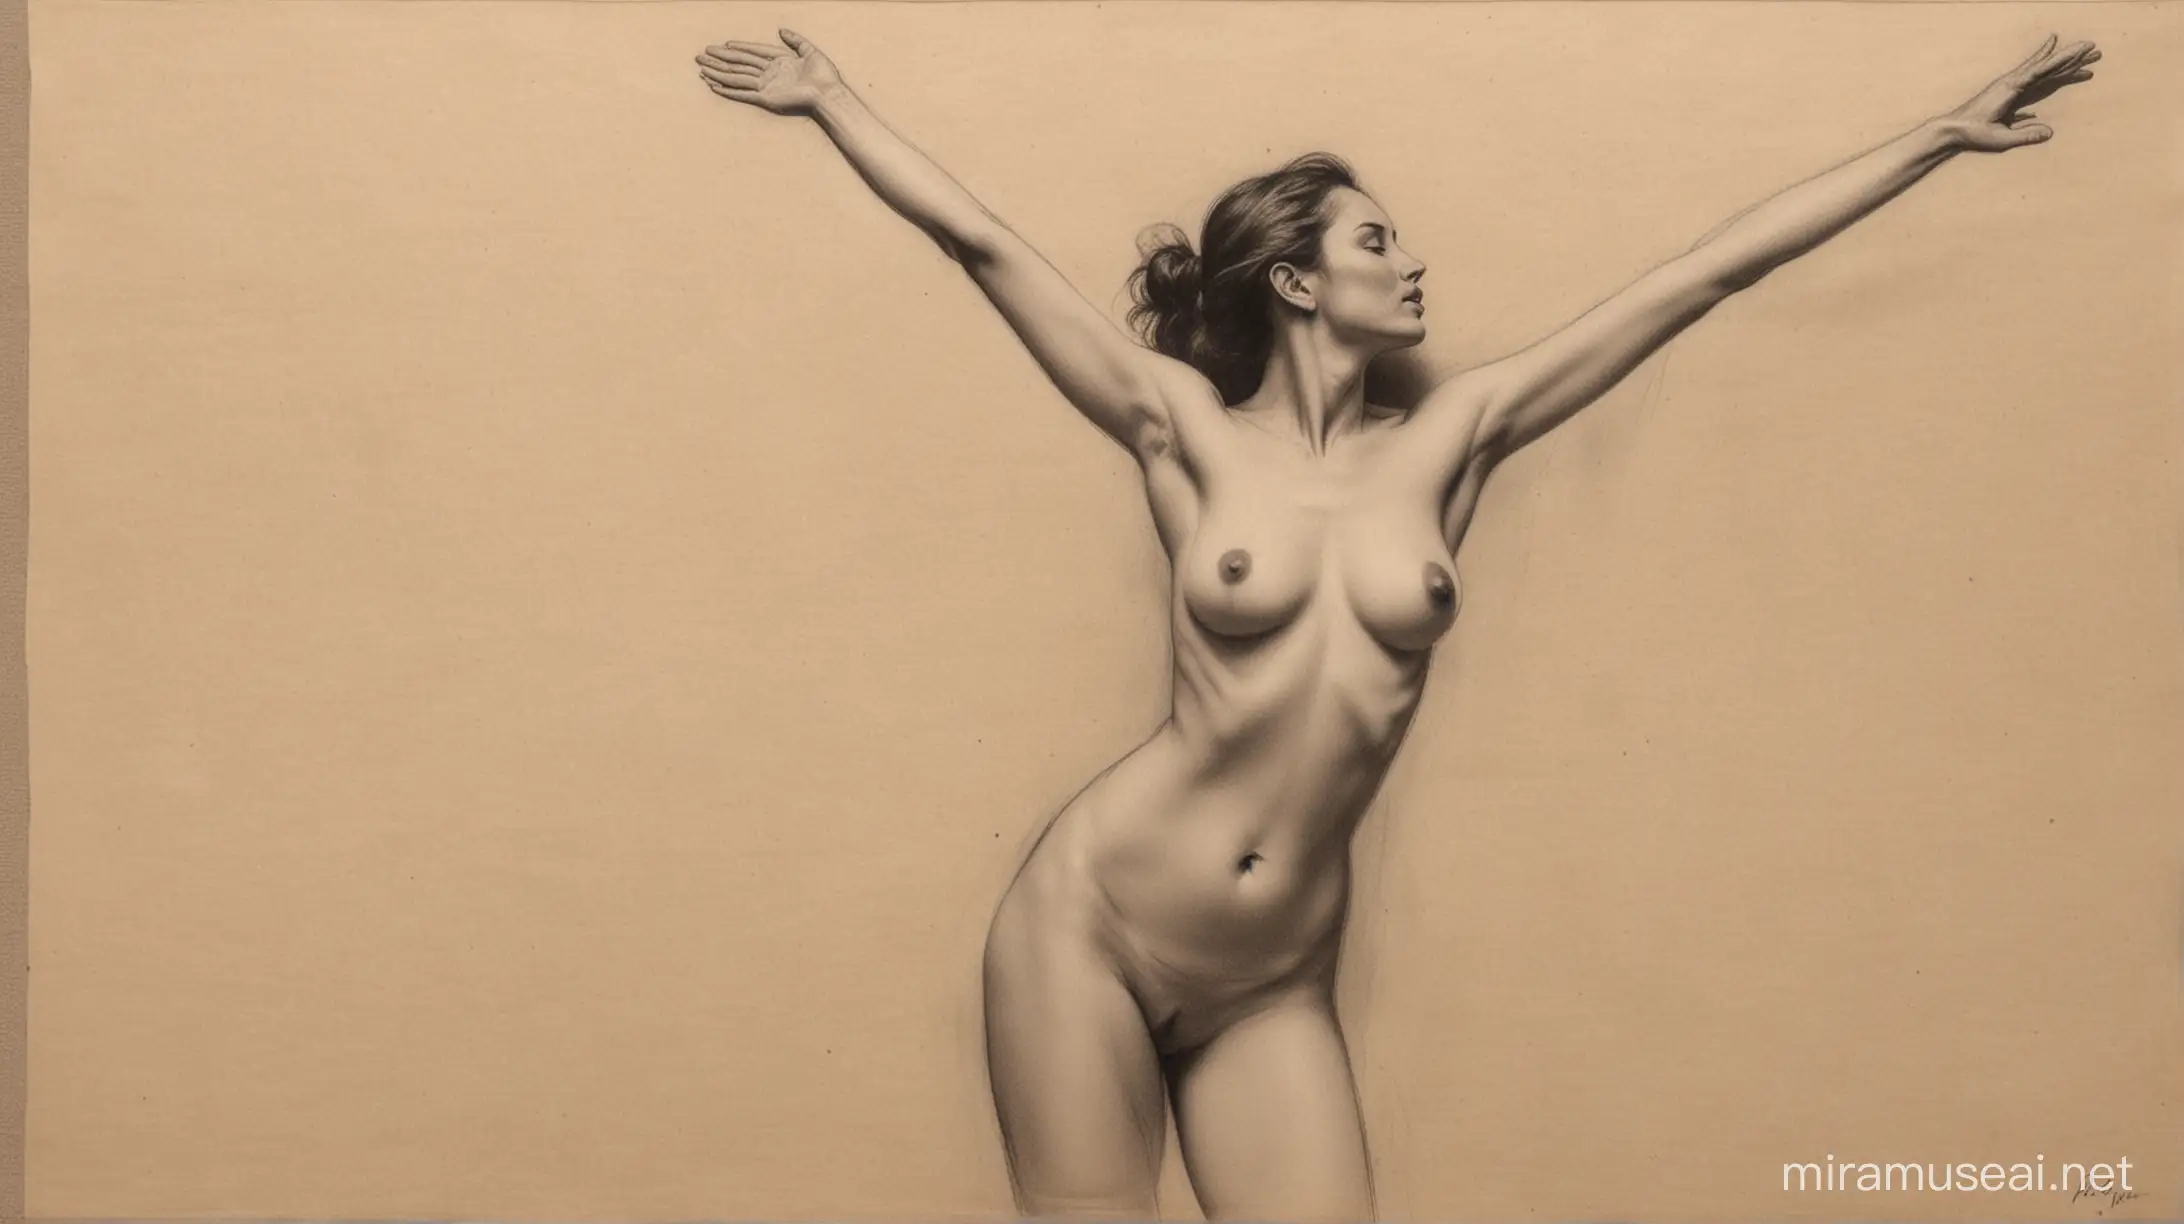 Nude Woman with Raised Arms Charcoal Art Inspired by Philippe Flohic